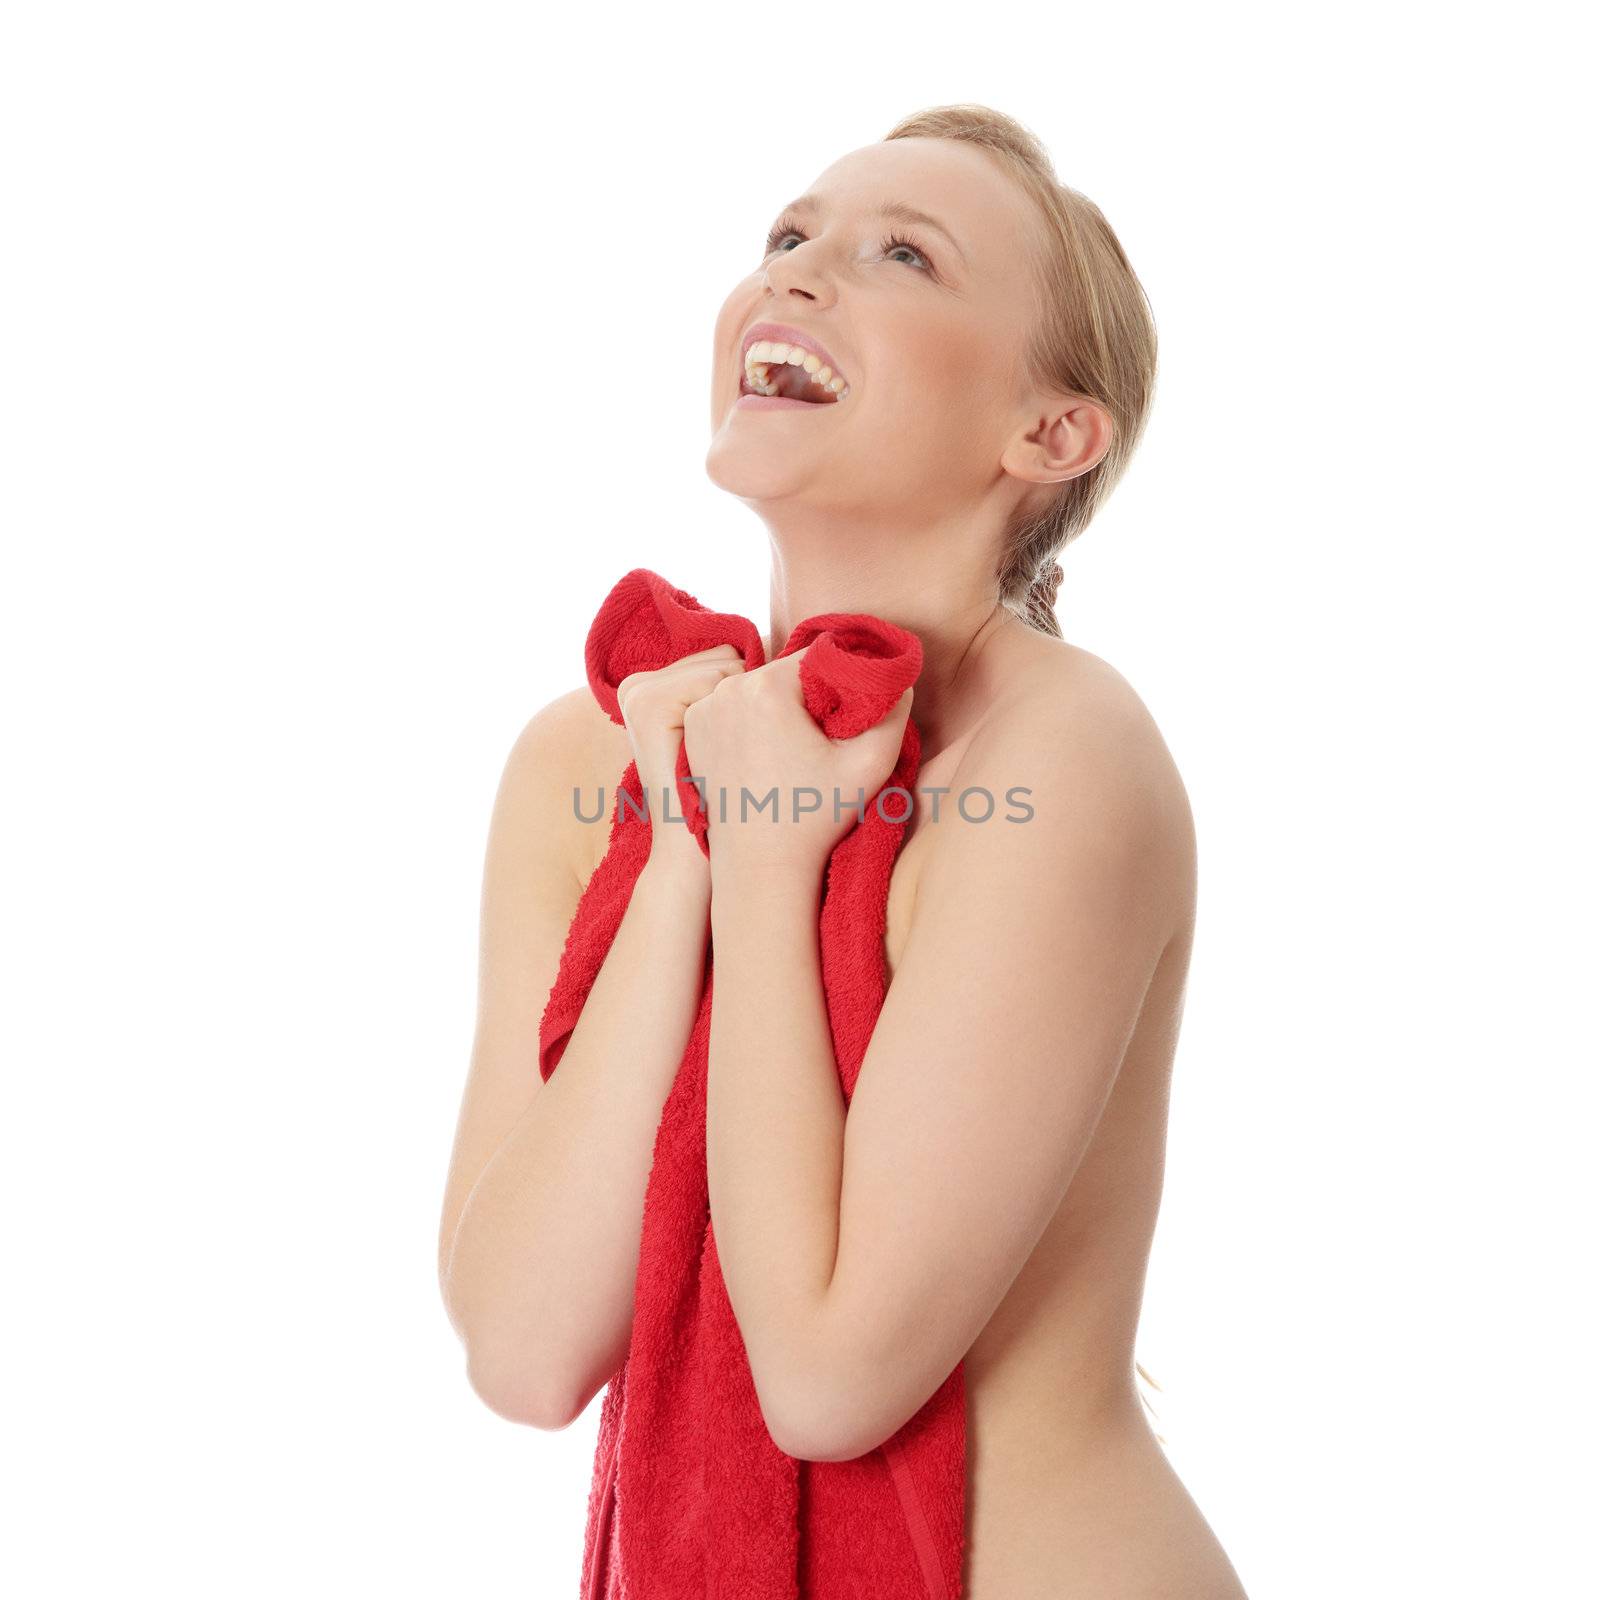 Attractive young nude woman covered by red towel, isolated on white